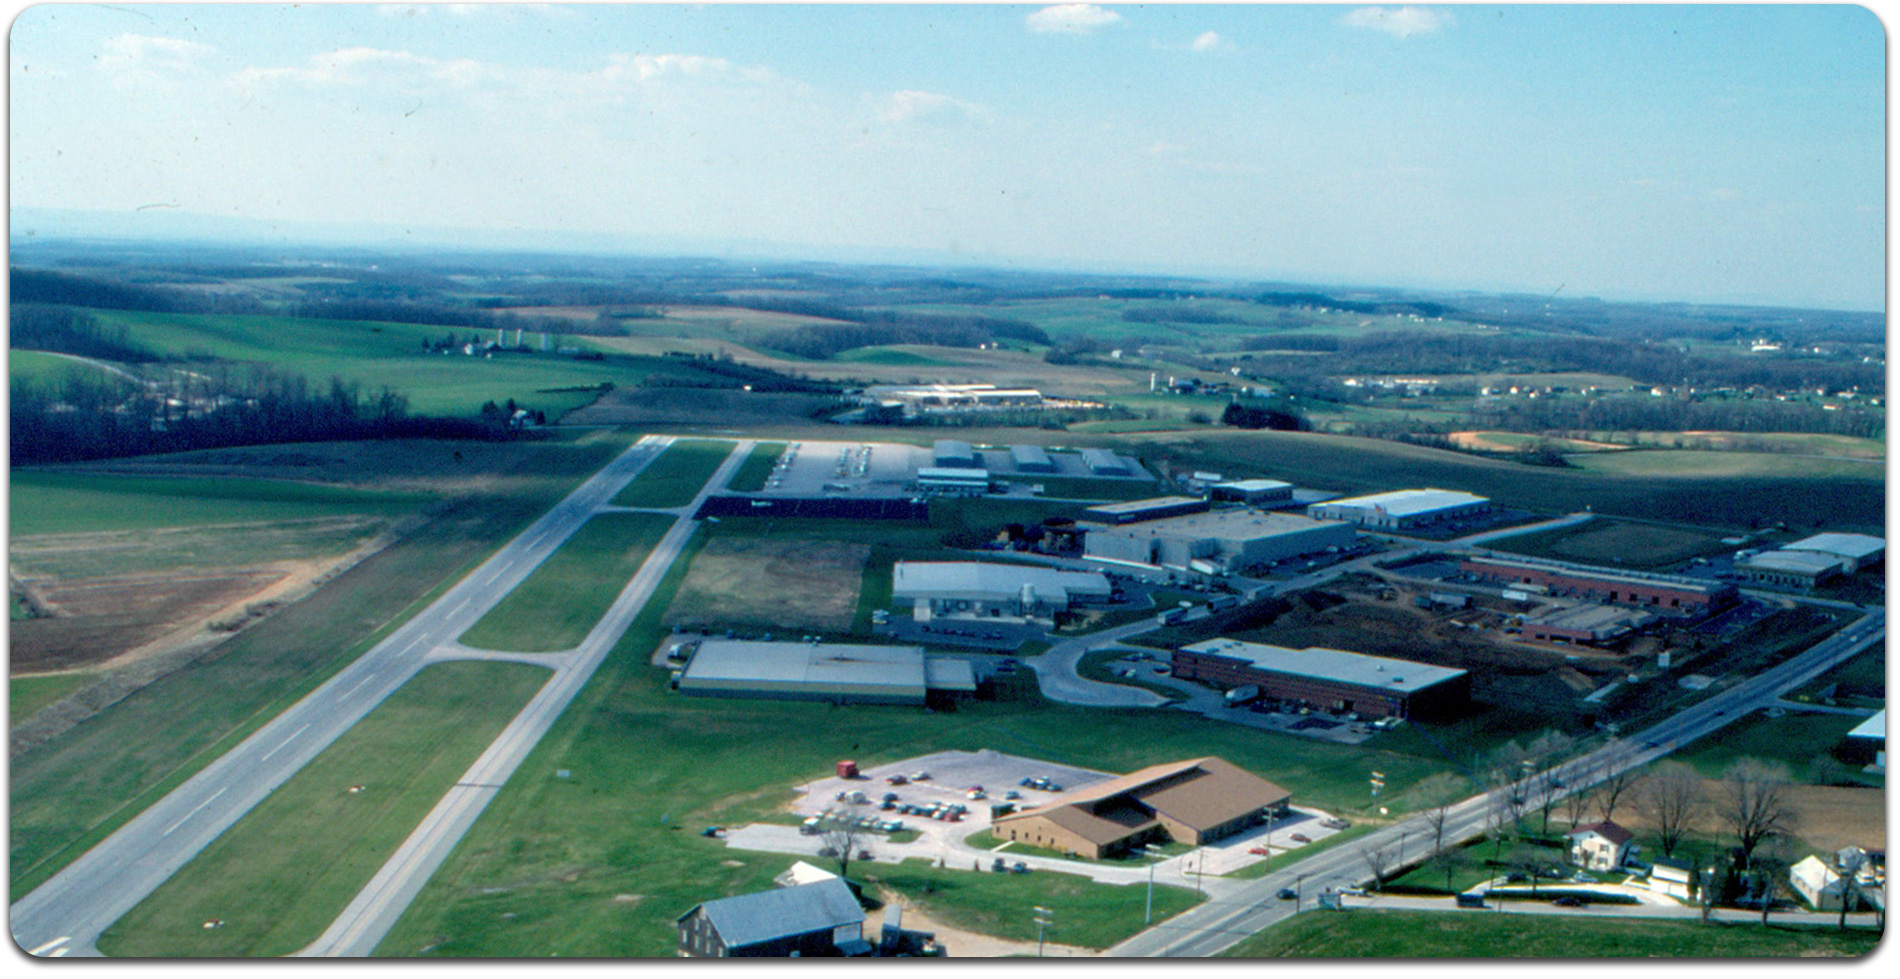 airport image from 1980